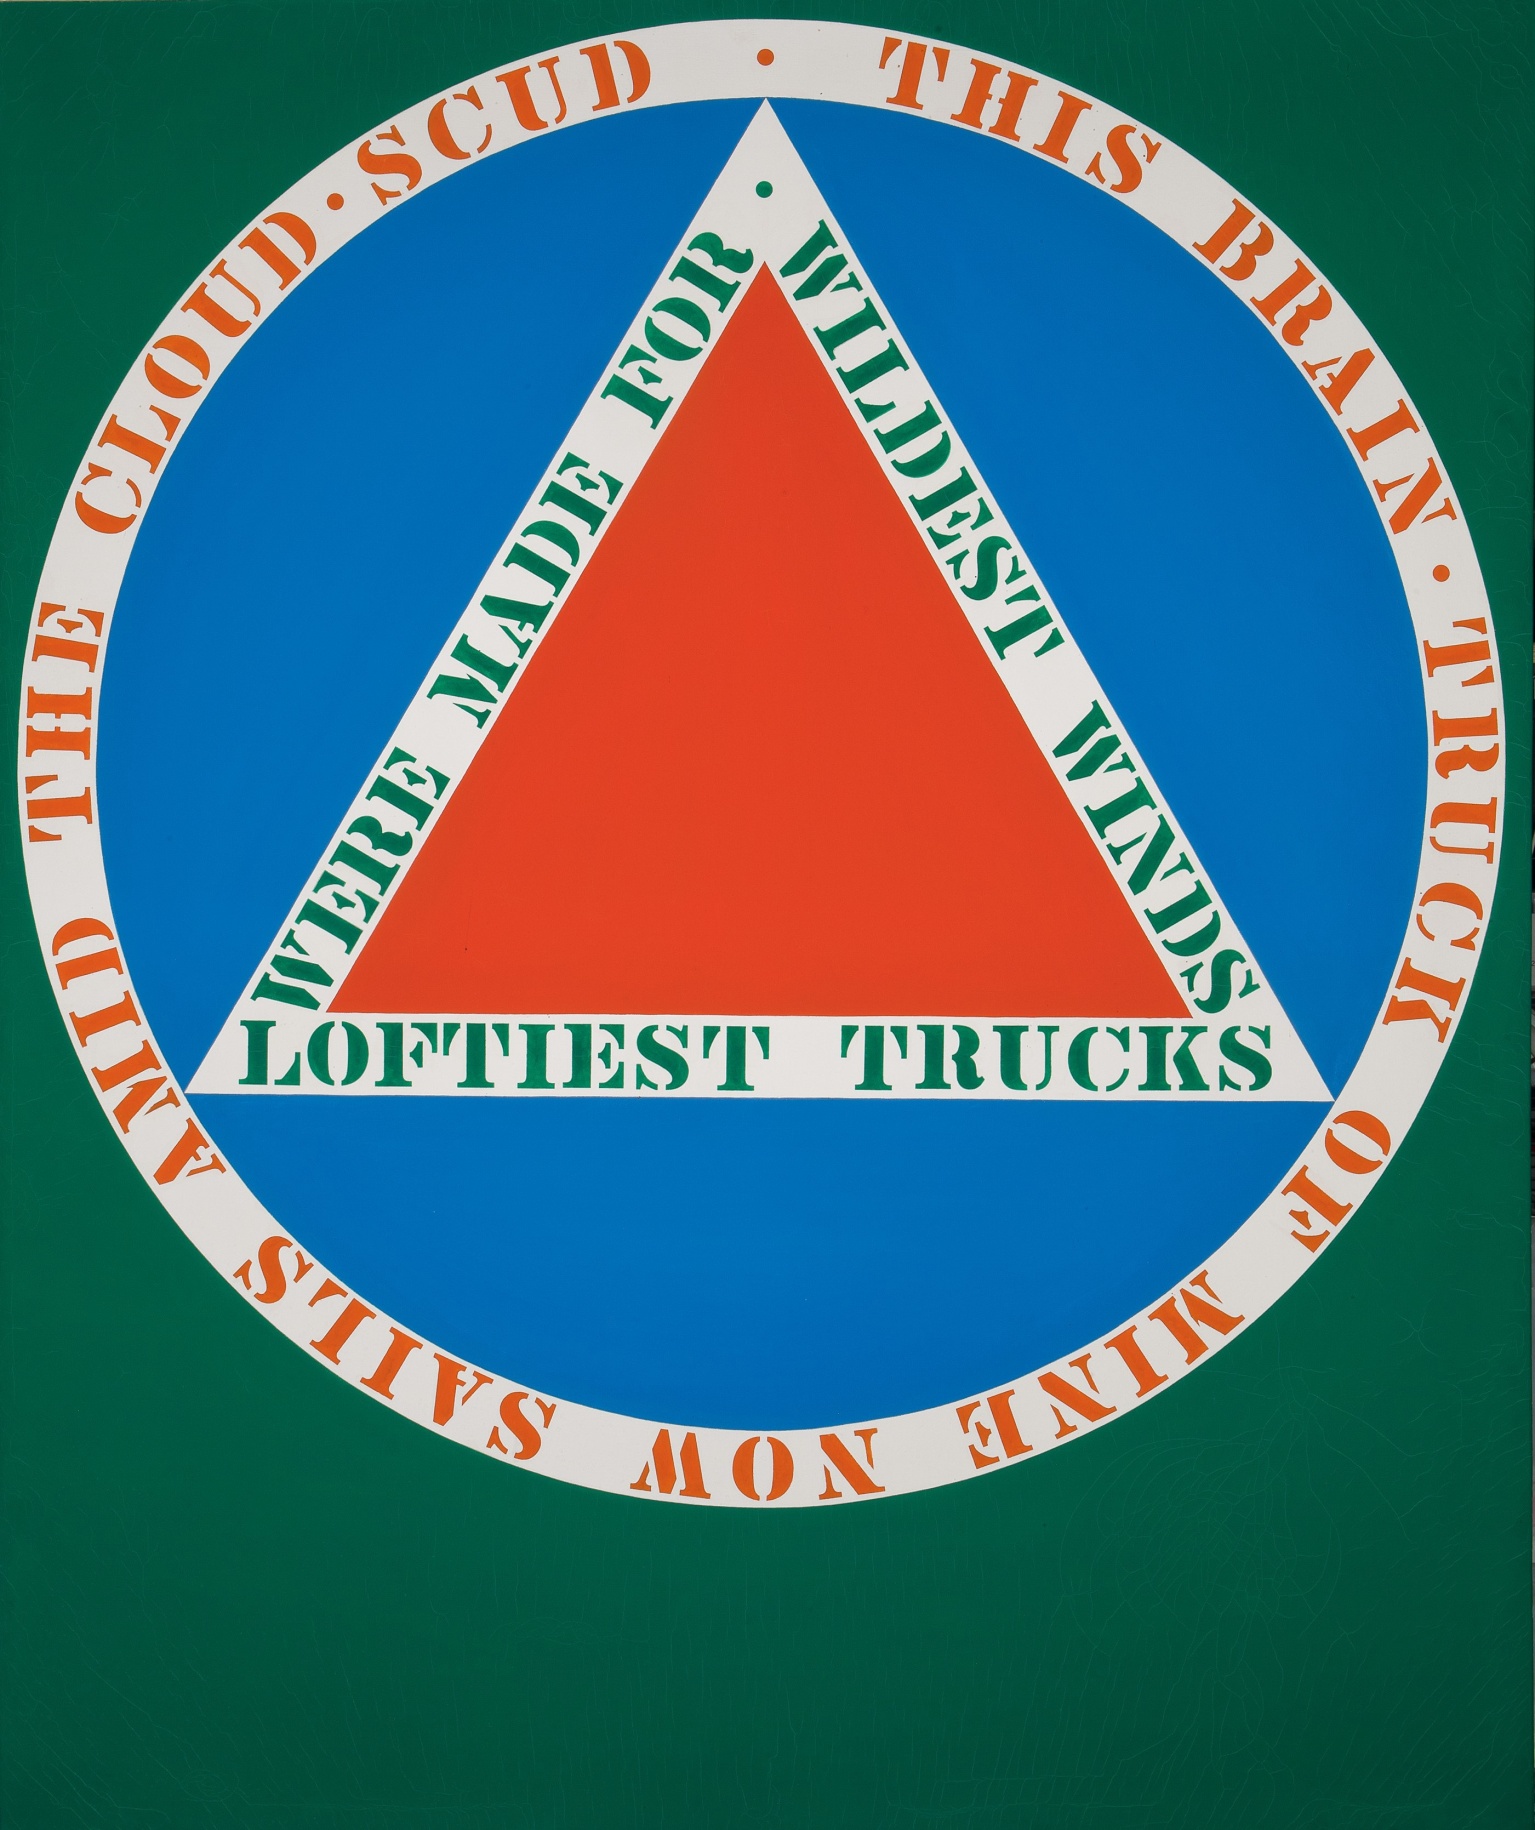 A 72 by 60 painting titled &quot;Melville&quot; that  consists of a large circle against a green background. In the center of the blue circle is a red triangle, surrounded by the stenciled green against white text &quot;loftiest trucks were made for wildest winds.&quot; Red stenciled text in a white ring surrounding the circle reads &quot;this brain truck of mine now sails amid the cloud scud&quot;